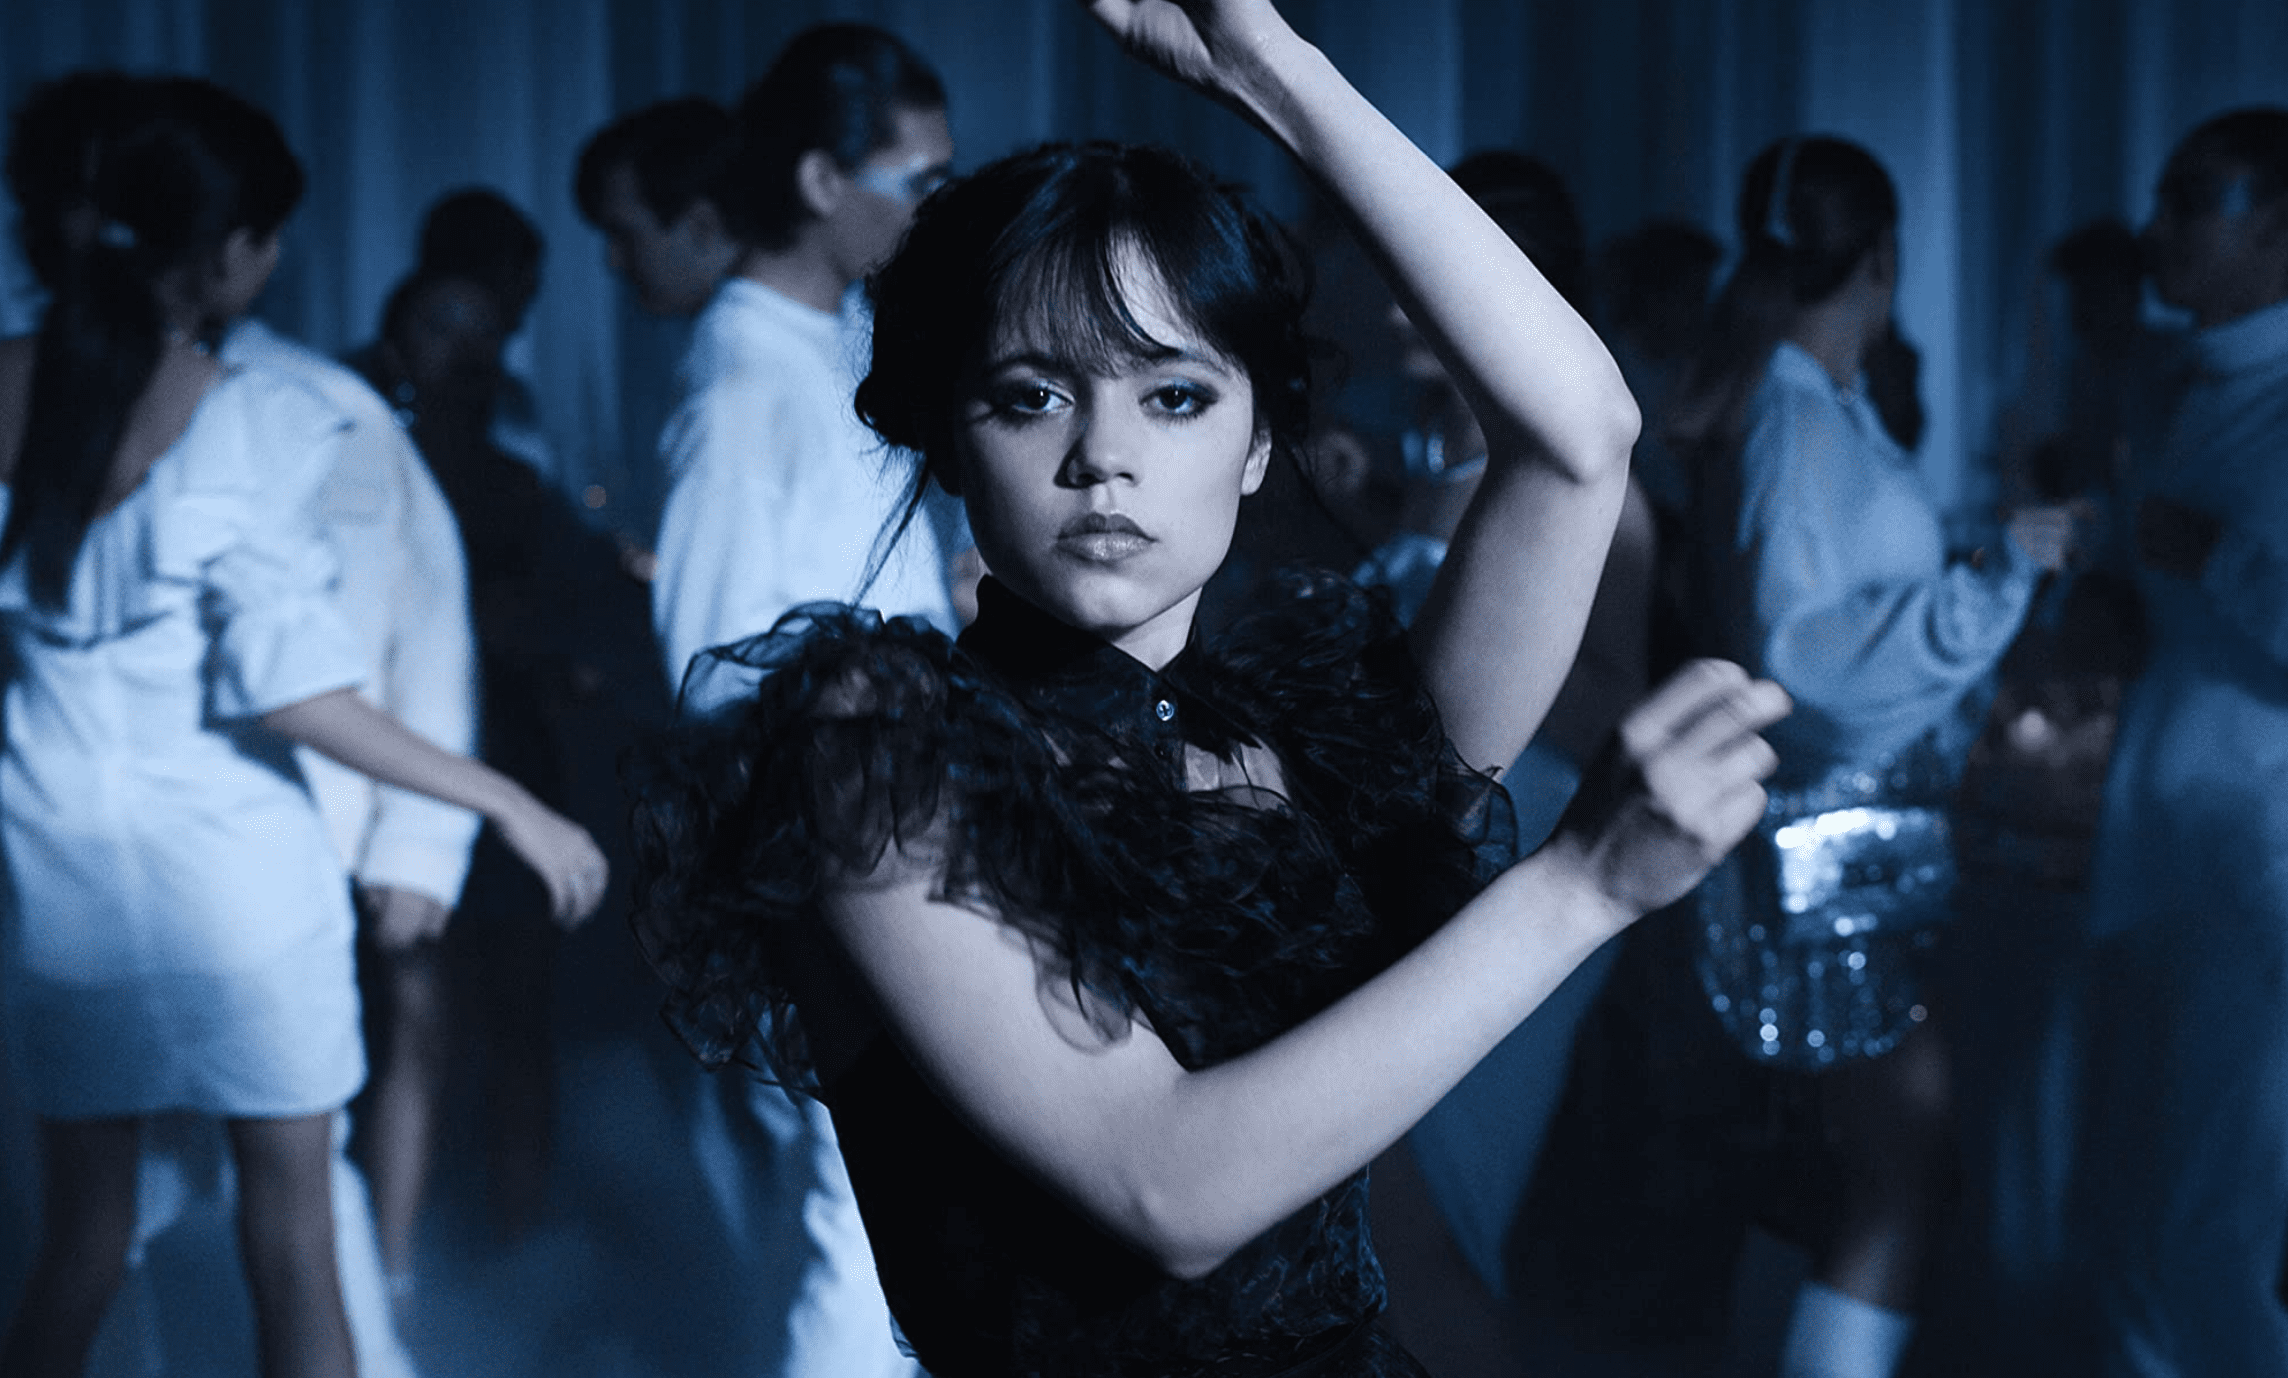 A girl in a black dress dances in this image from Netflix